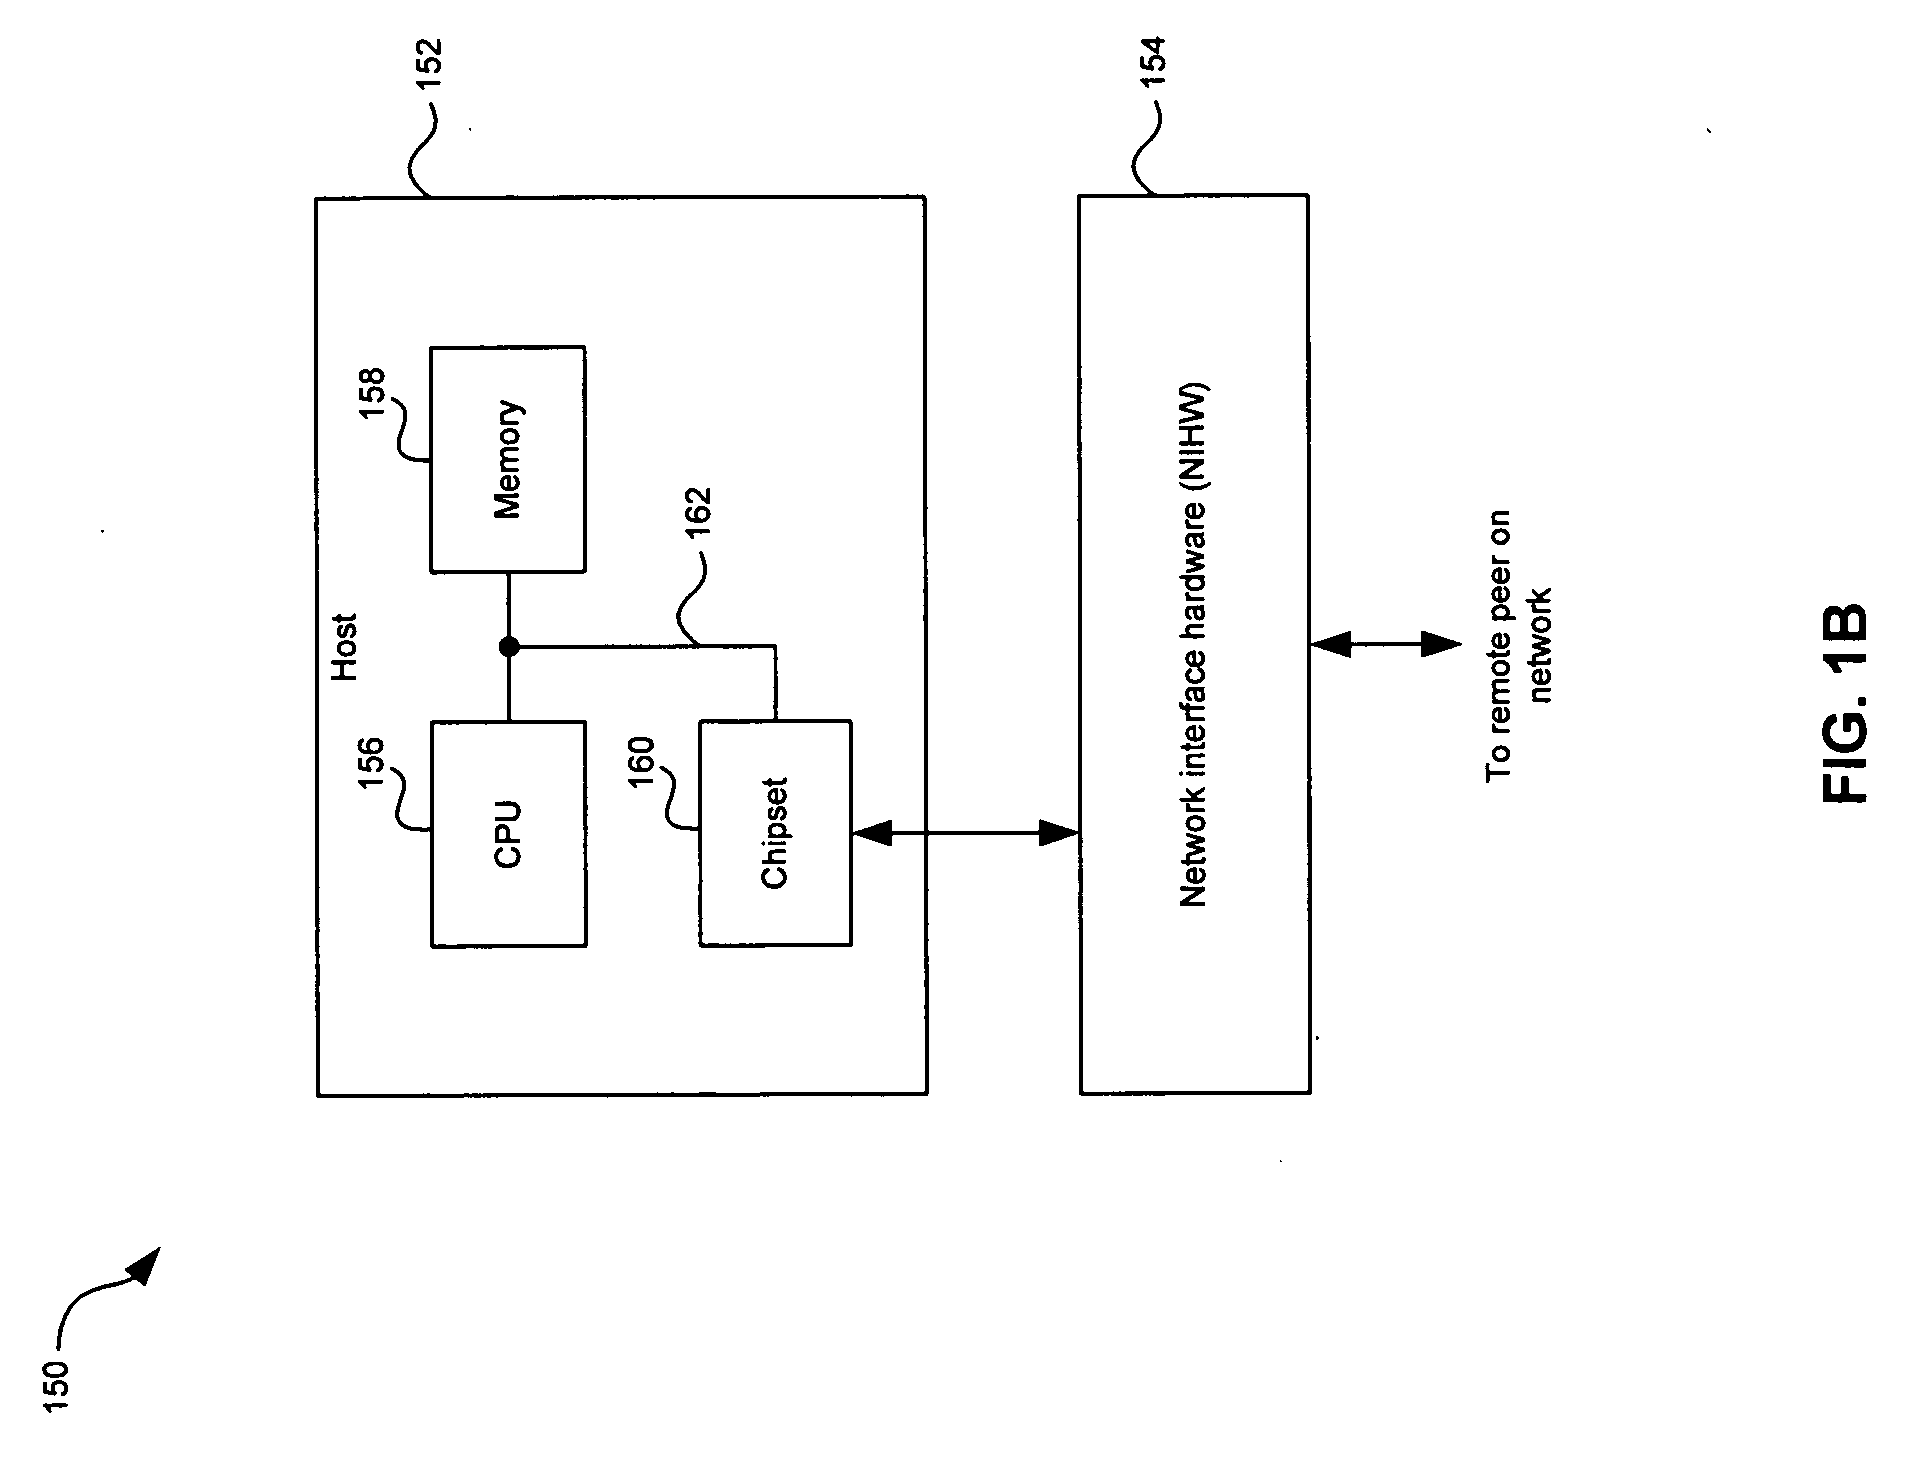 Method and system for adaptive queue and buffer control based on monitoring in a packet network switch